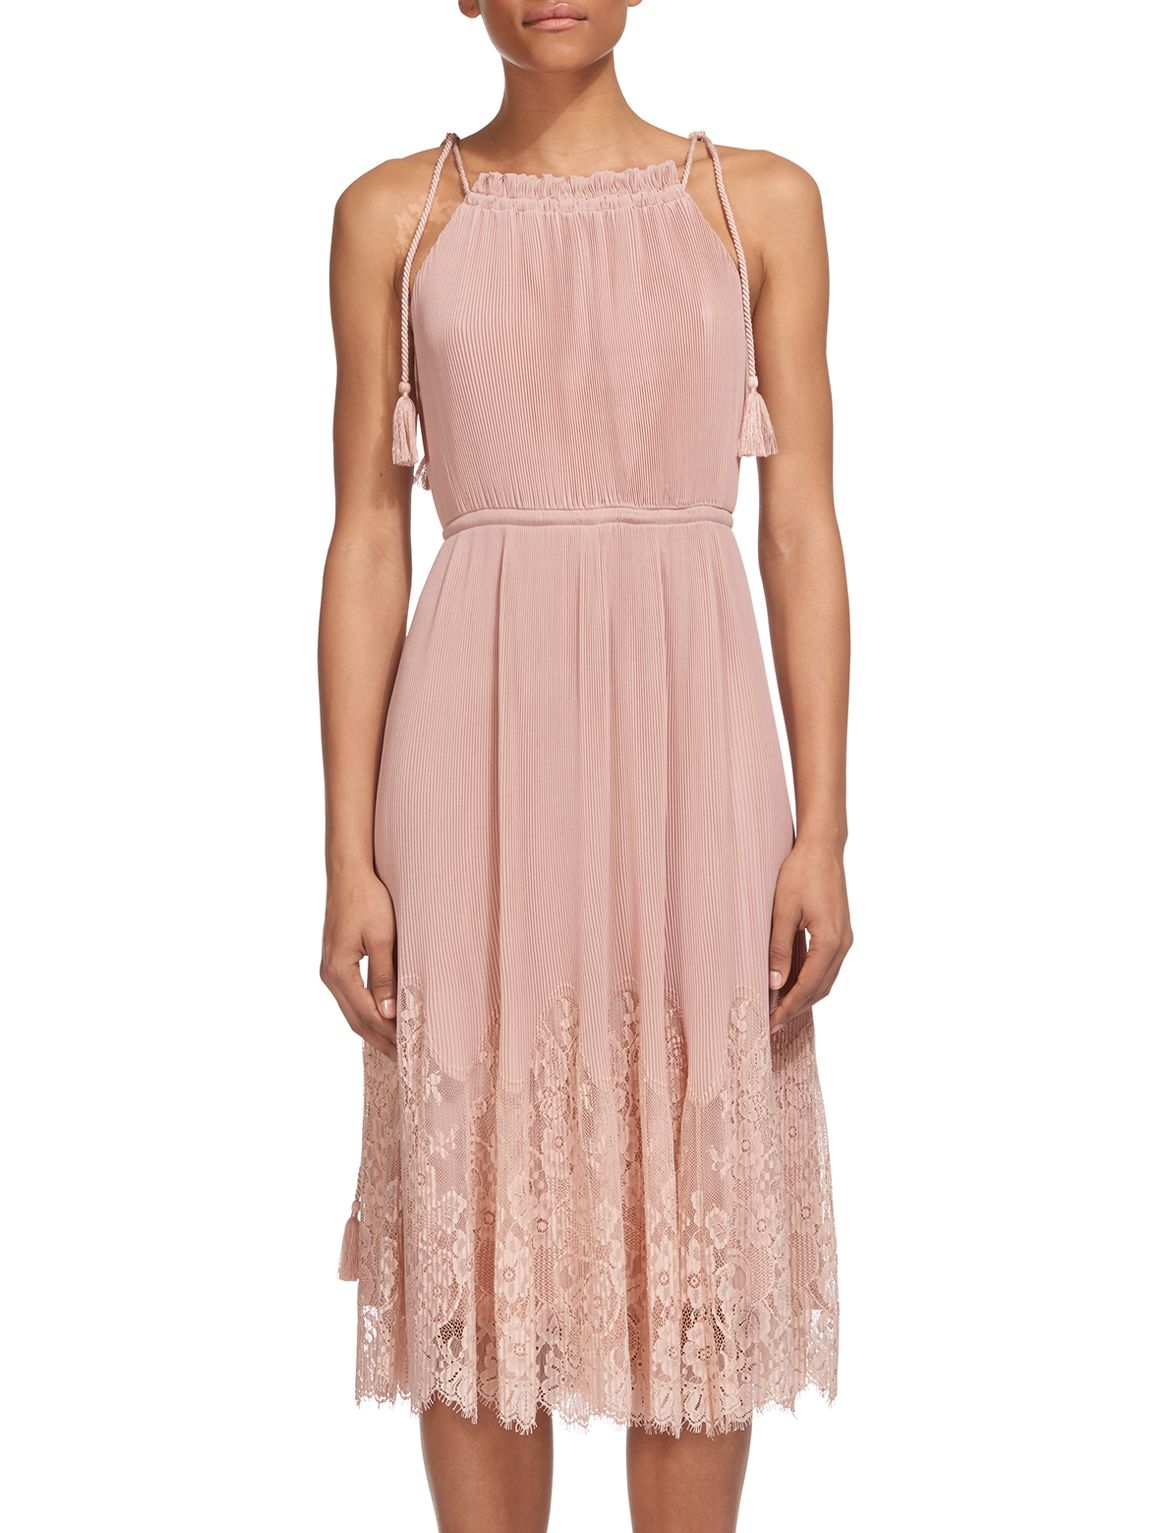 Whistles Lilian Pleated Lace Mix Dress, Pale Pink at John Lewis & Partners